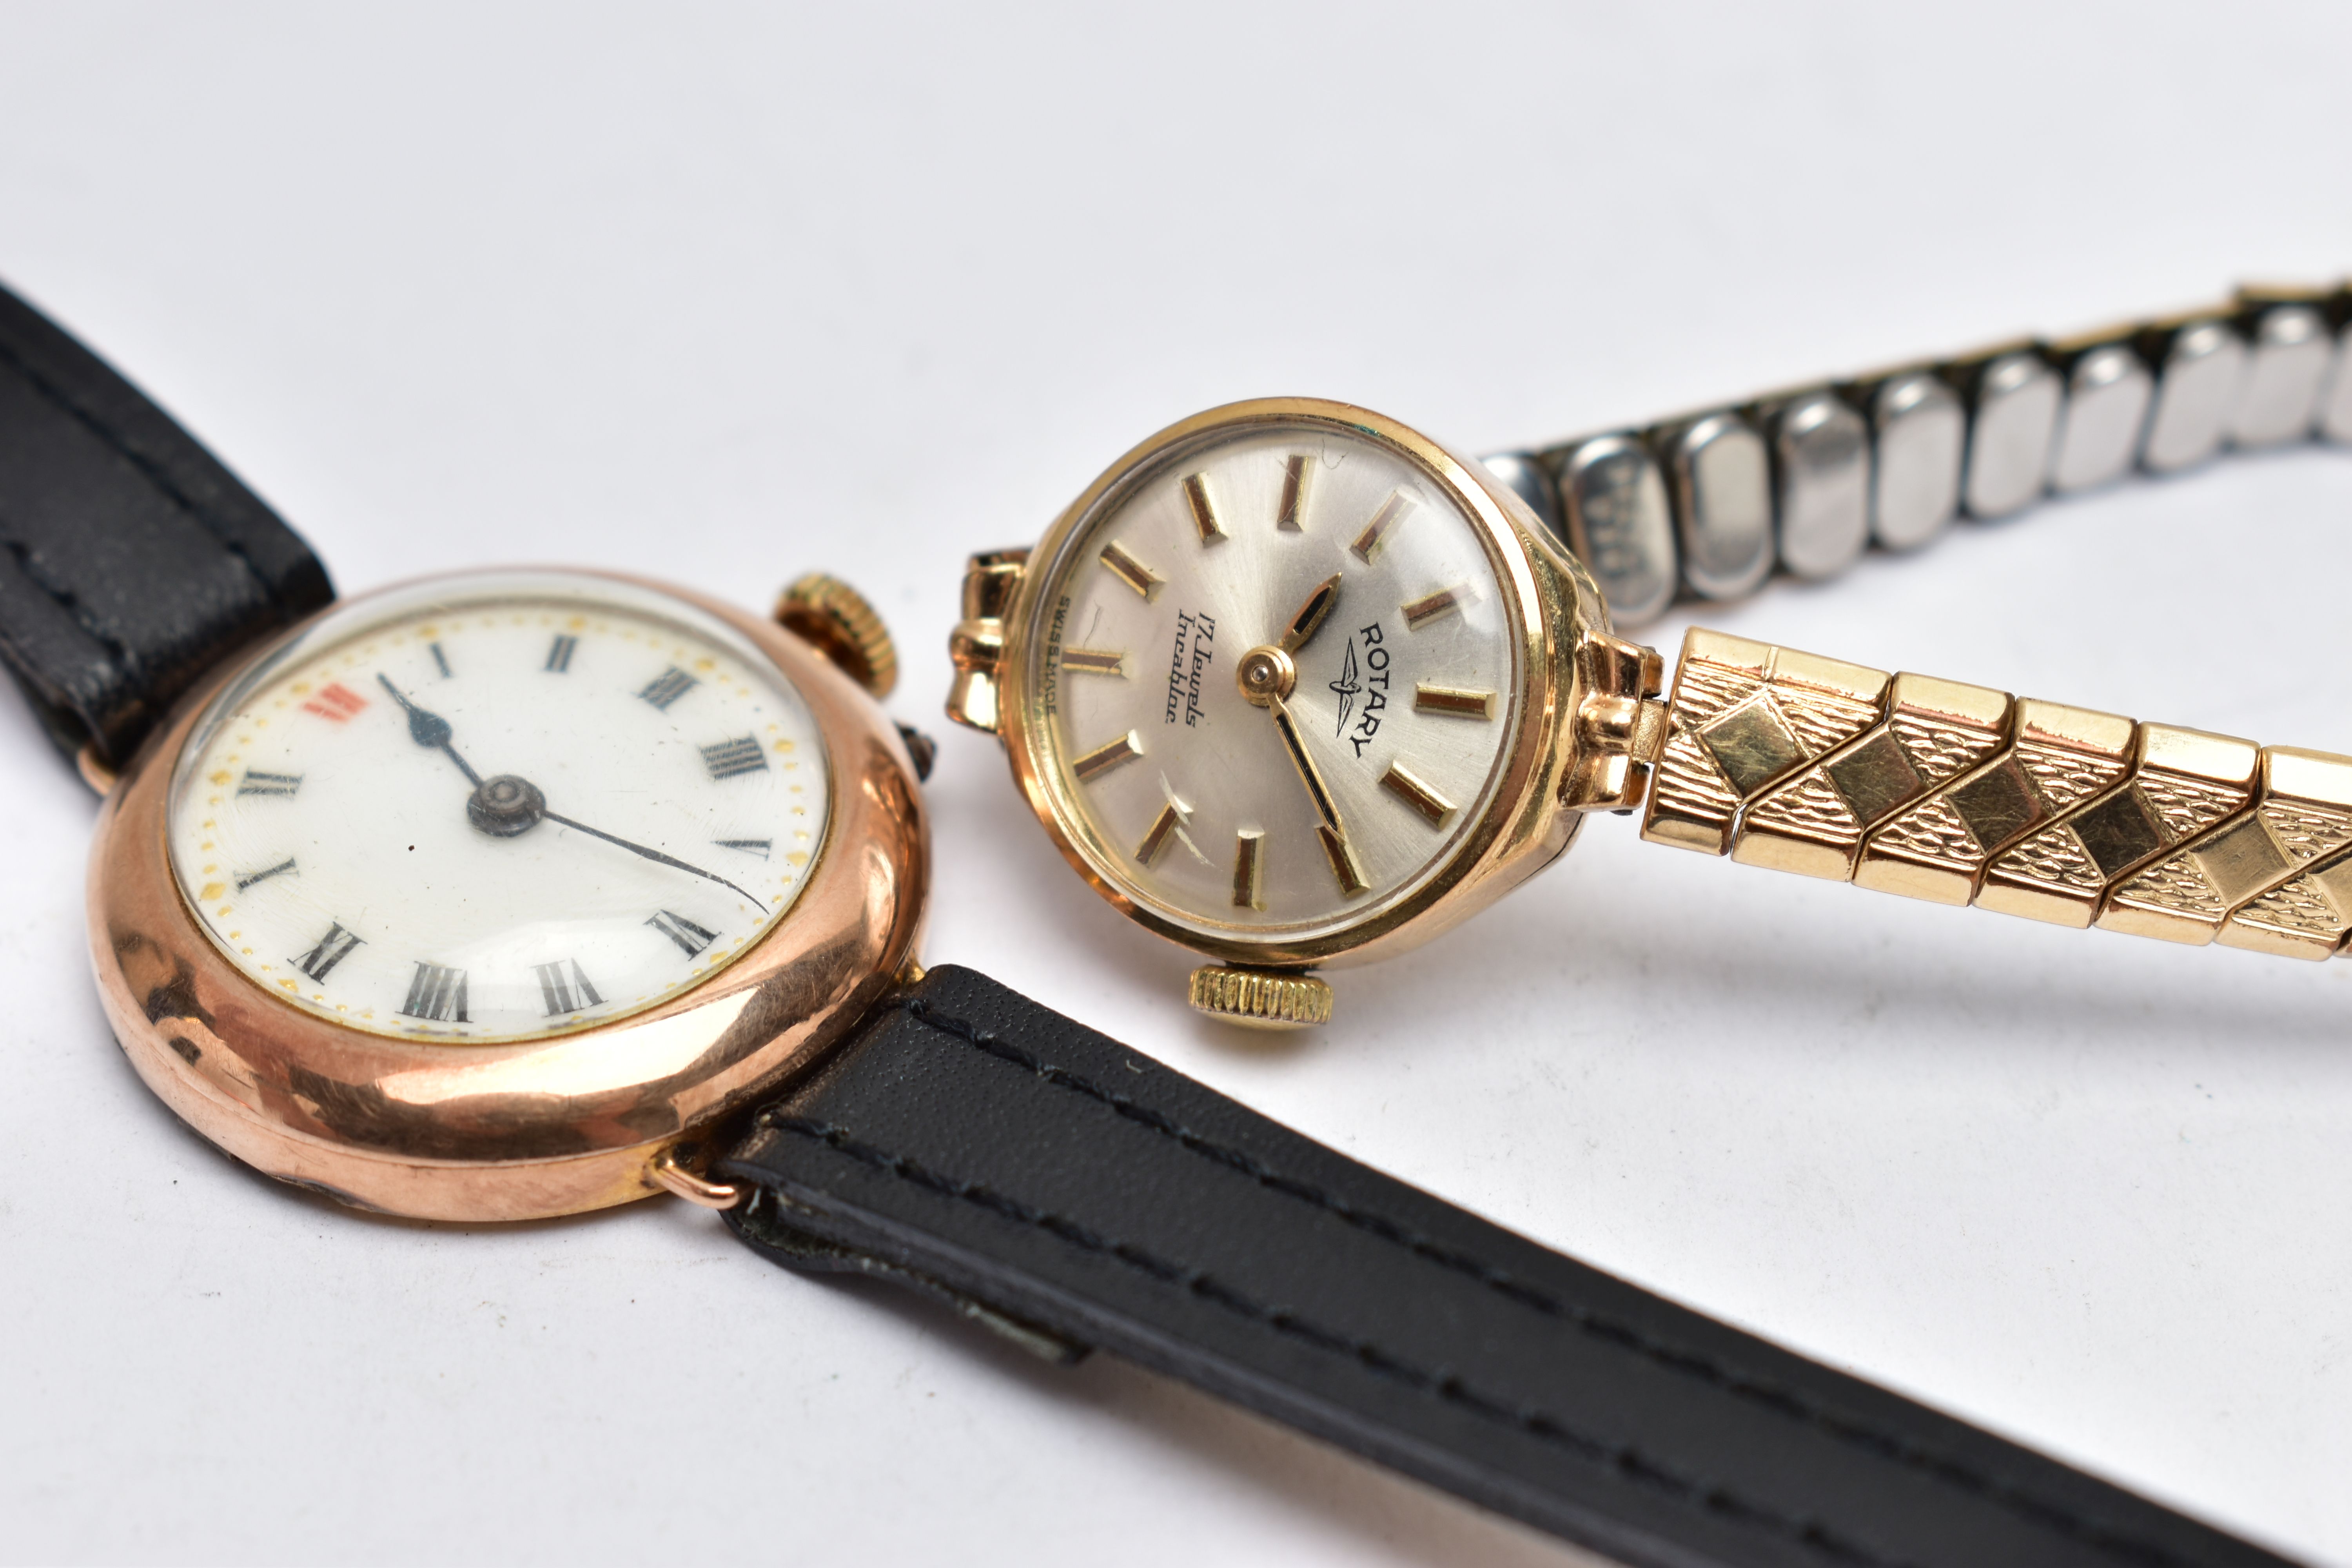 TWO LADIES 9CT GOLD WRISTWATCHES, the first a manual wind watch with a round white dial, Roman